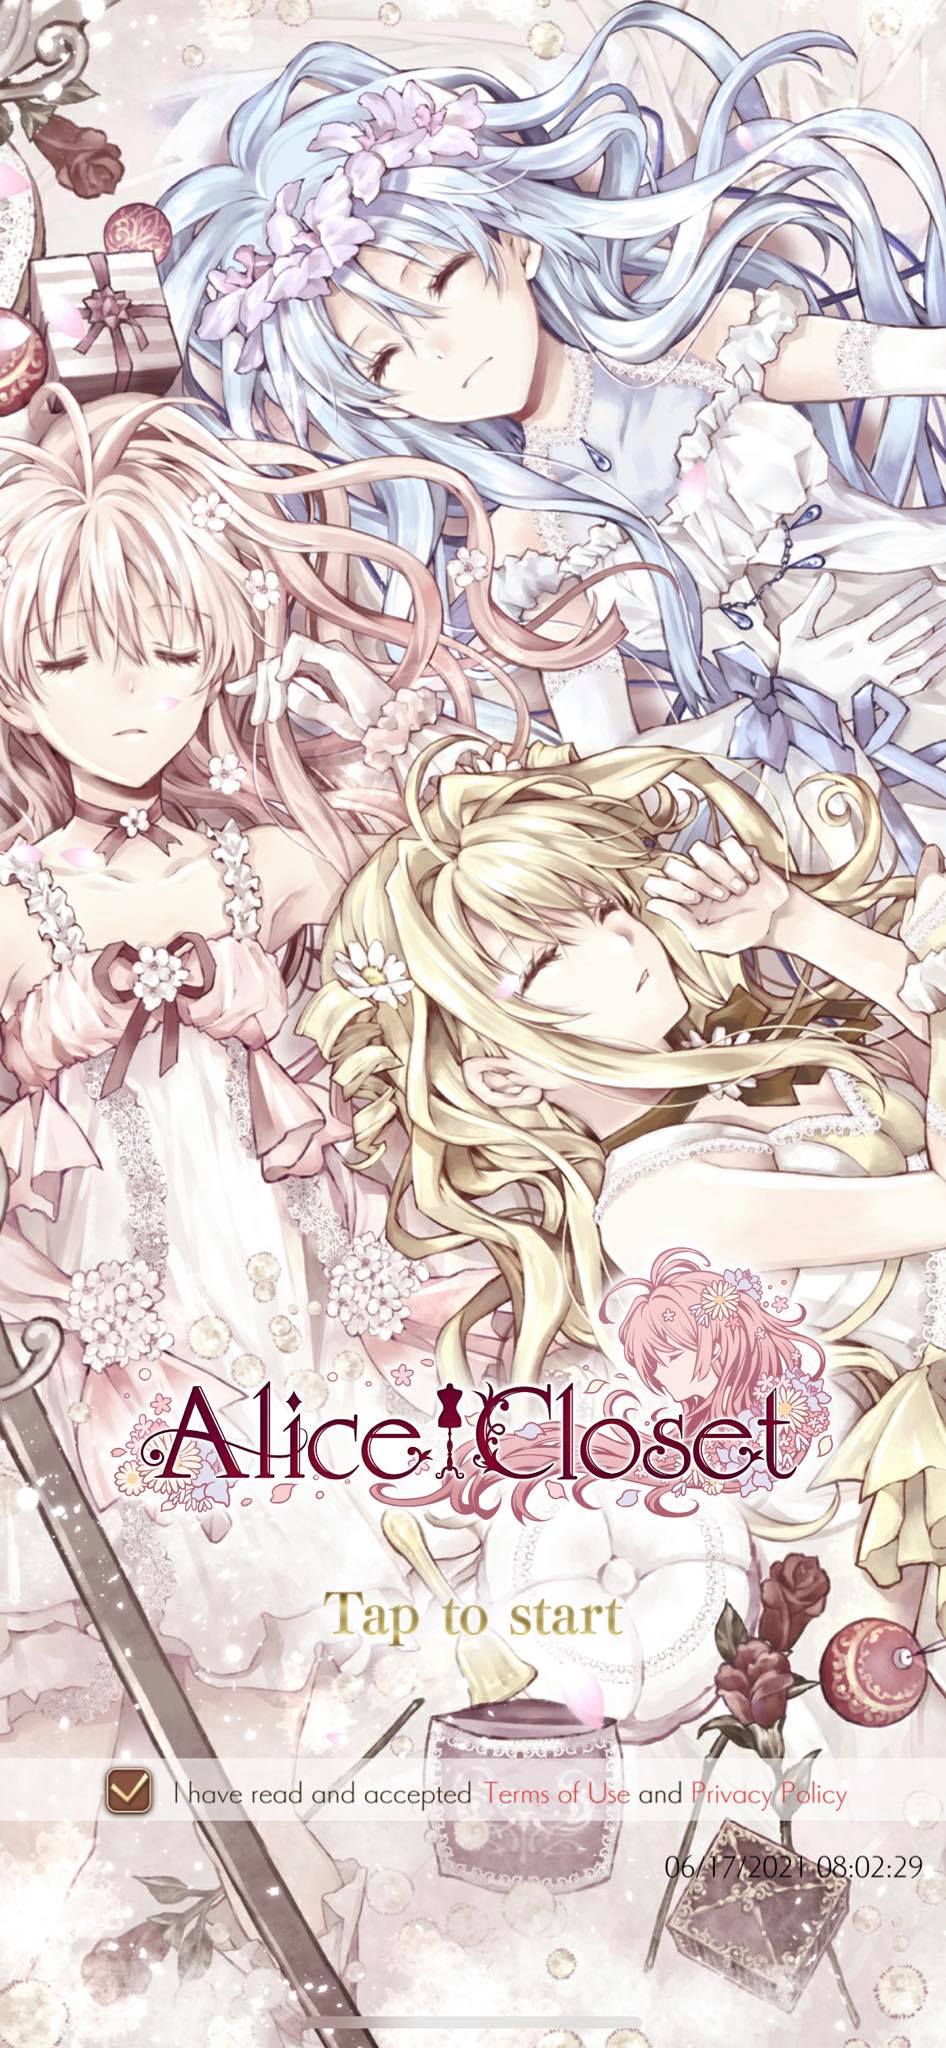 Alice Closet Anime Dressup Mobile Game Review